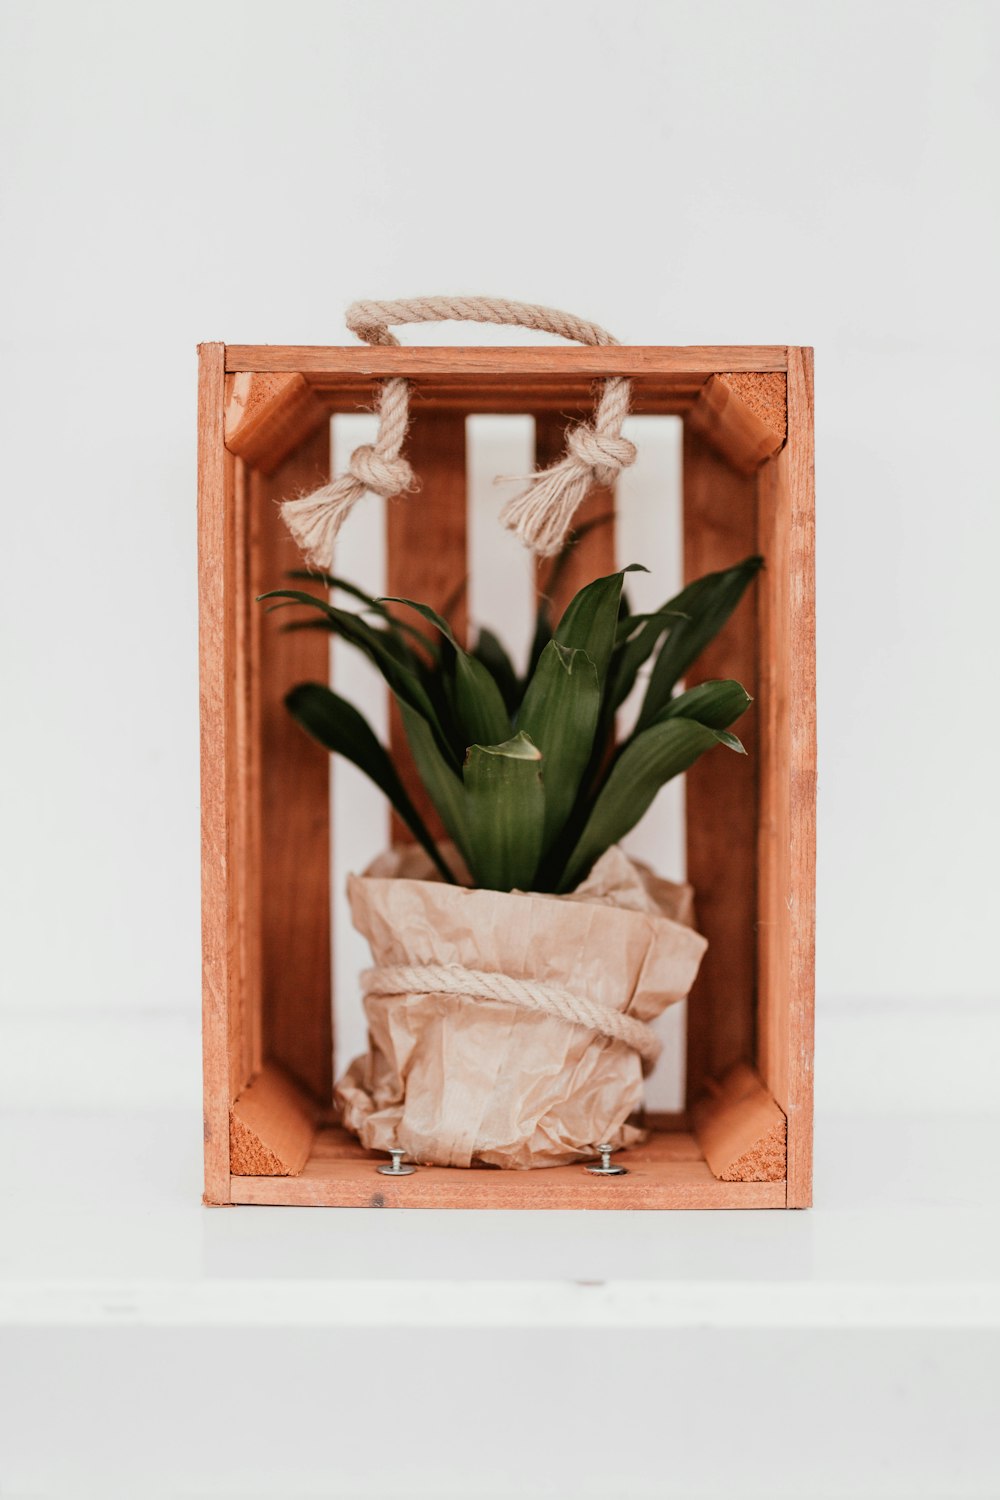 green plant in brown wooden crate